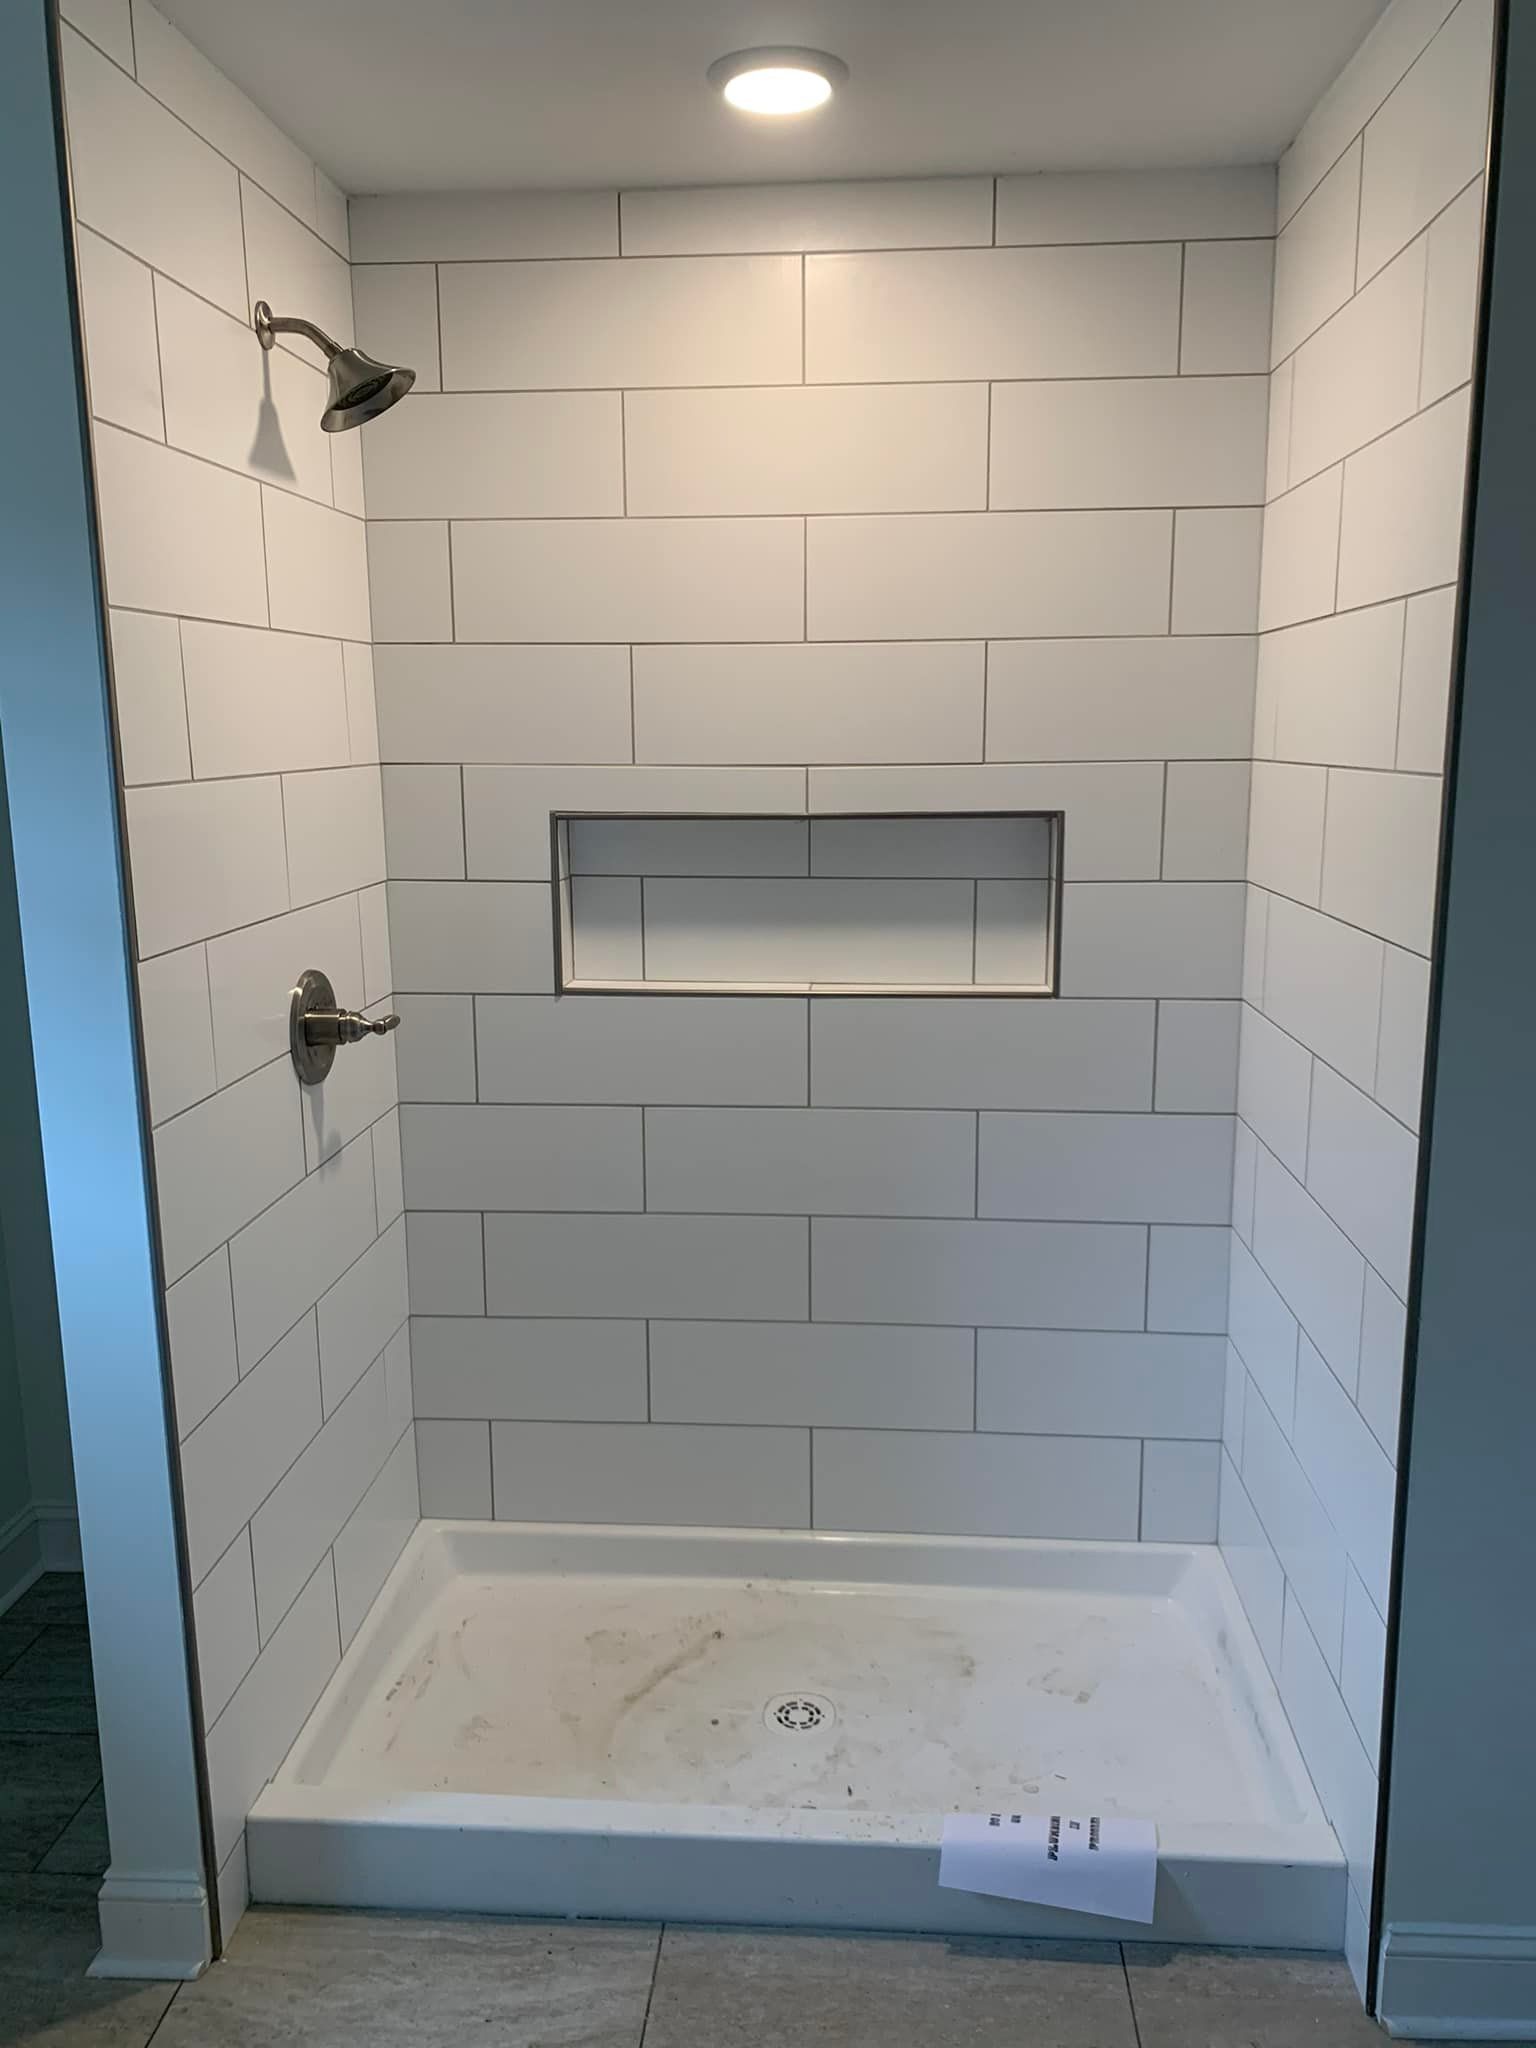 Bathroom Remodeling for Precision Tile LLC in Richmond, Kentucky